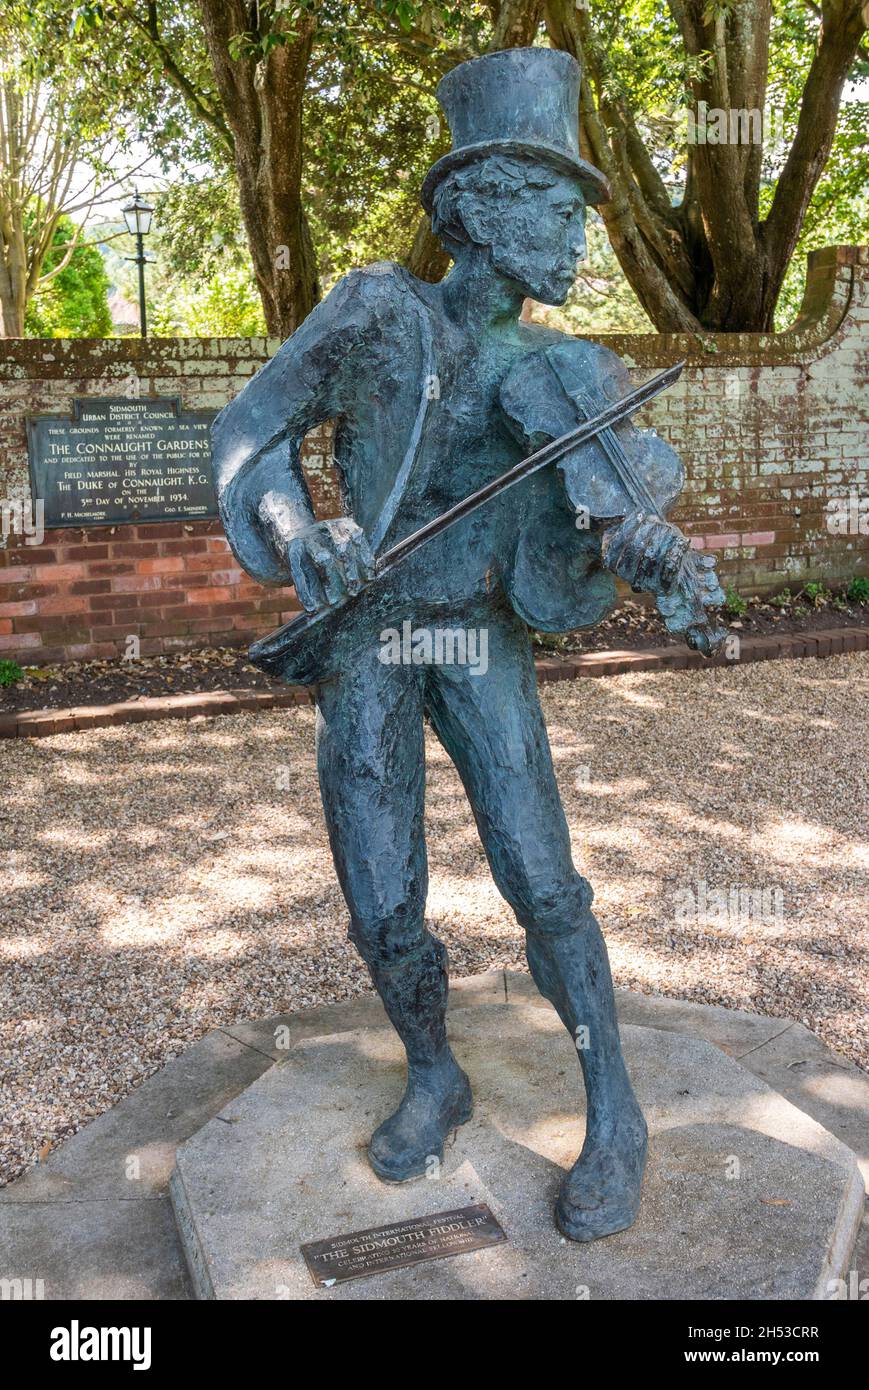 Bronze fidder statue commemorating 50th anniversary of the Sidmouth folk festival by Greta Berlin Connaught Gardens in Sidmouth Devon England UK GB Stock Photo